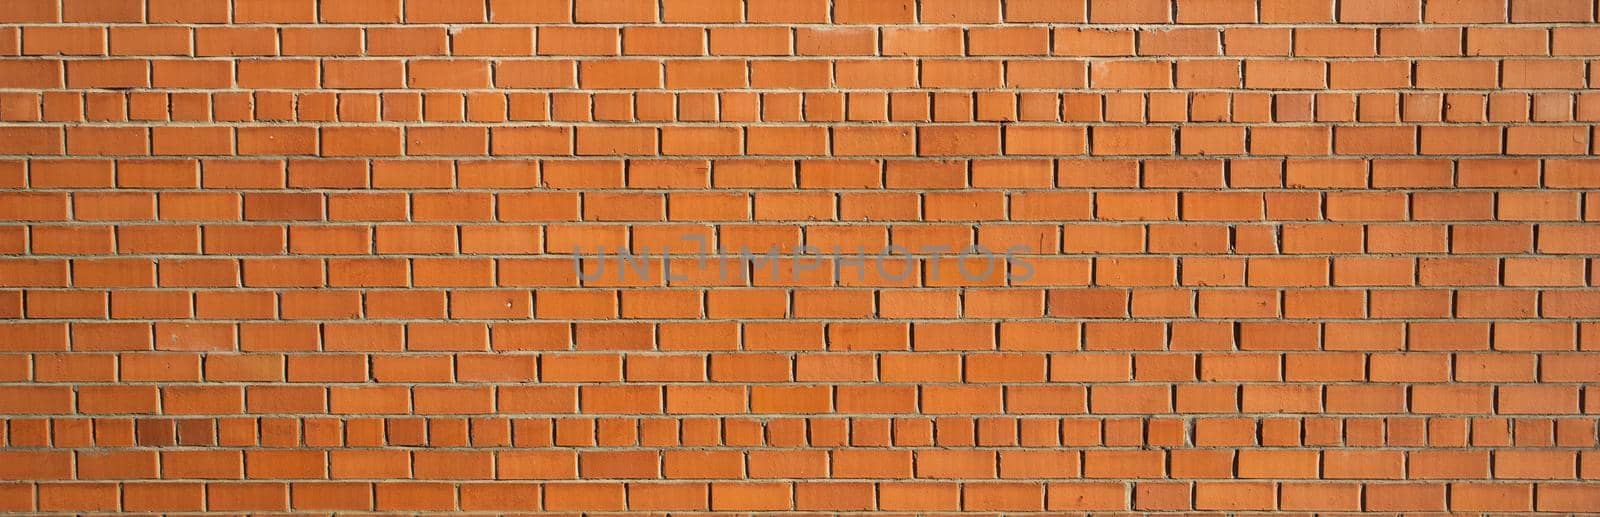 A close up of a red brick wall by Olayola